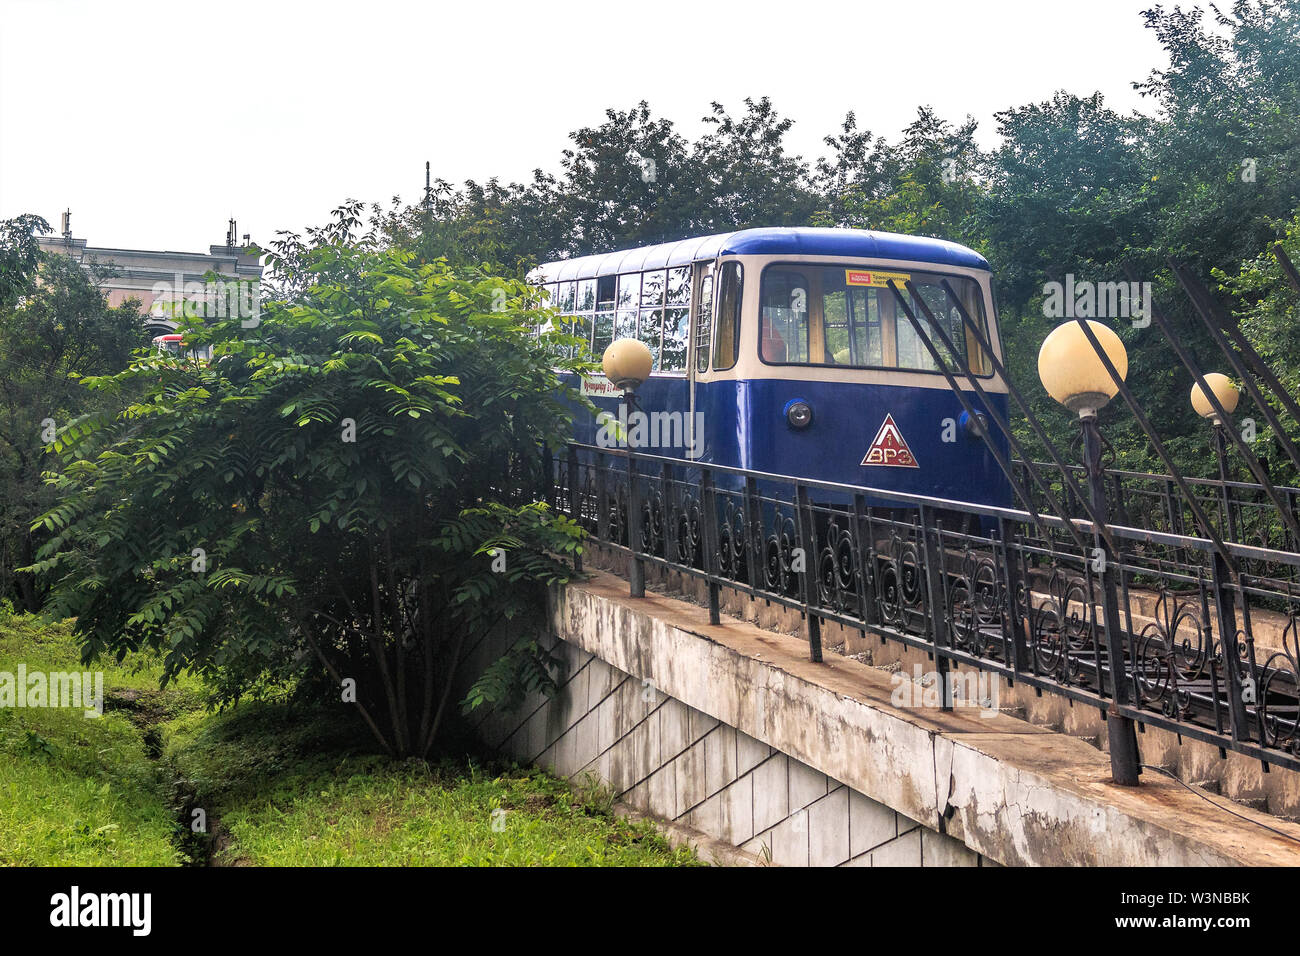 VLADIVOSTOK, RUSSIA - JULY 13, 2019: The Blue Car of the Funicular goes down. The attraction of the capital of the Russian Far East's Vladivostok city Stock Photo